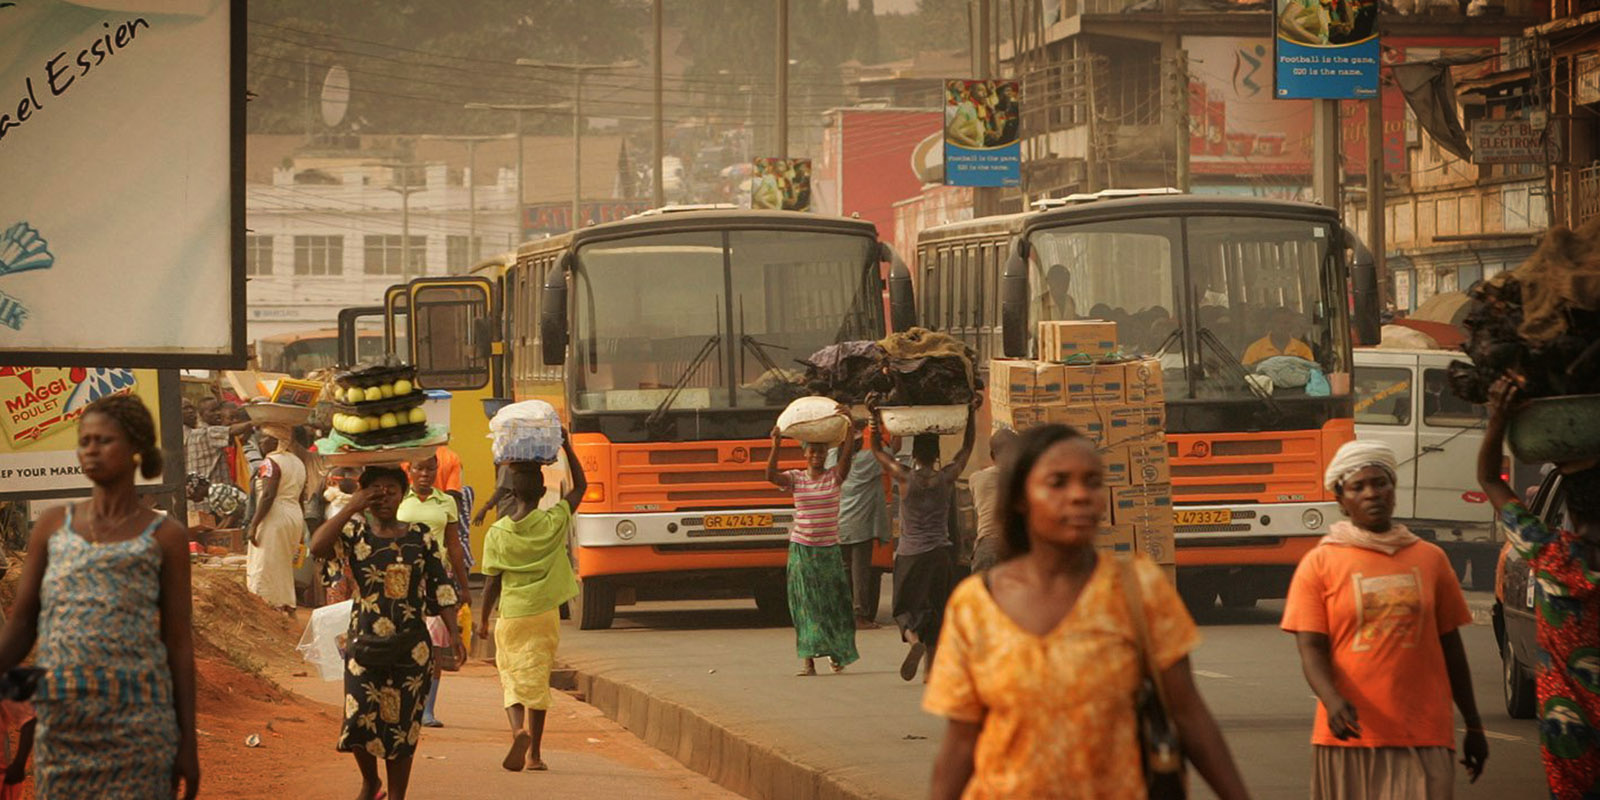 Beyond business as usual: Addressing Ghana's unemployment woes